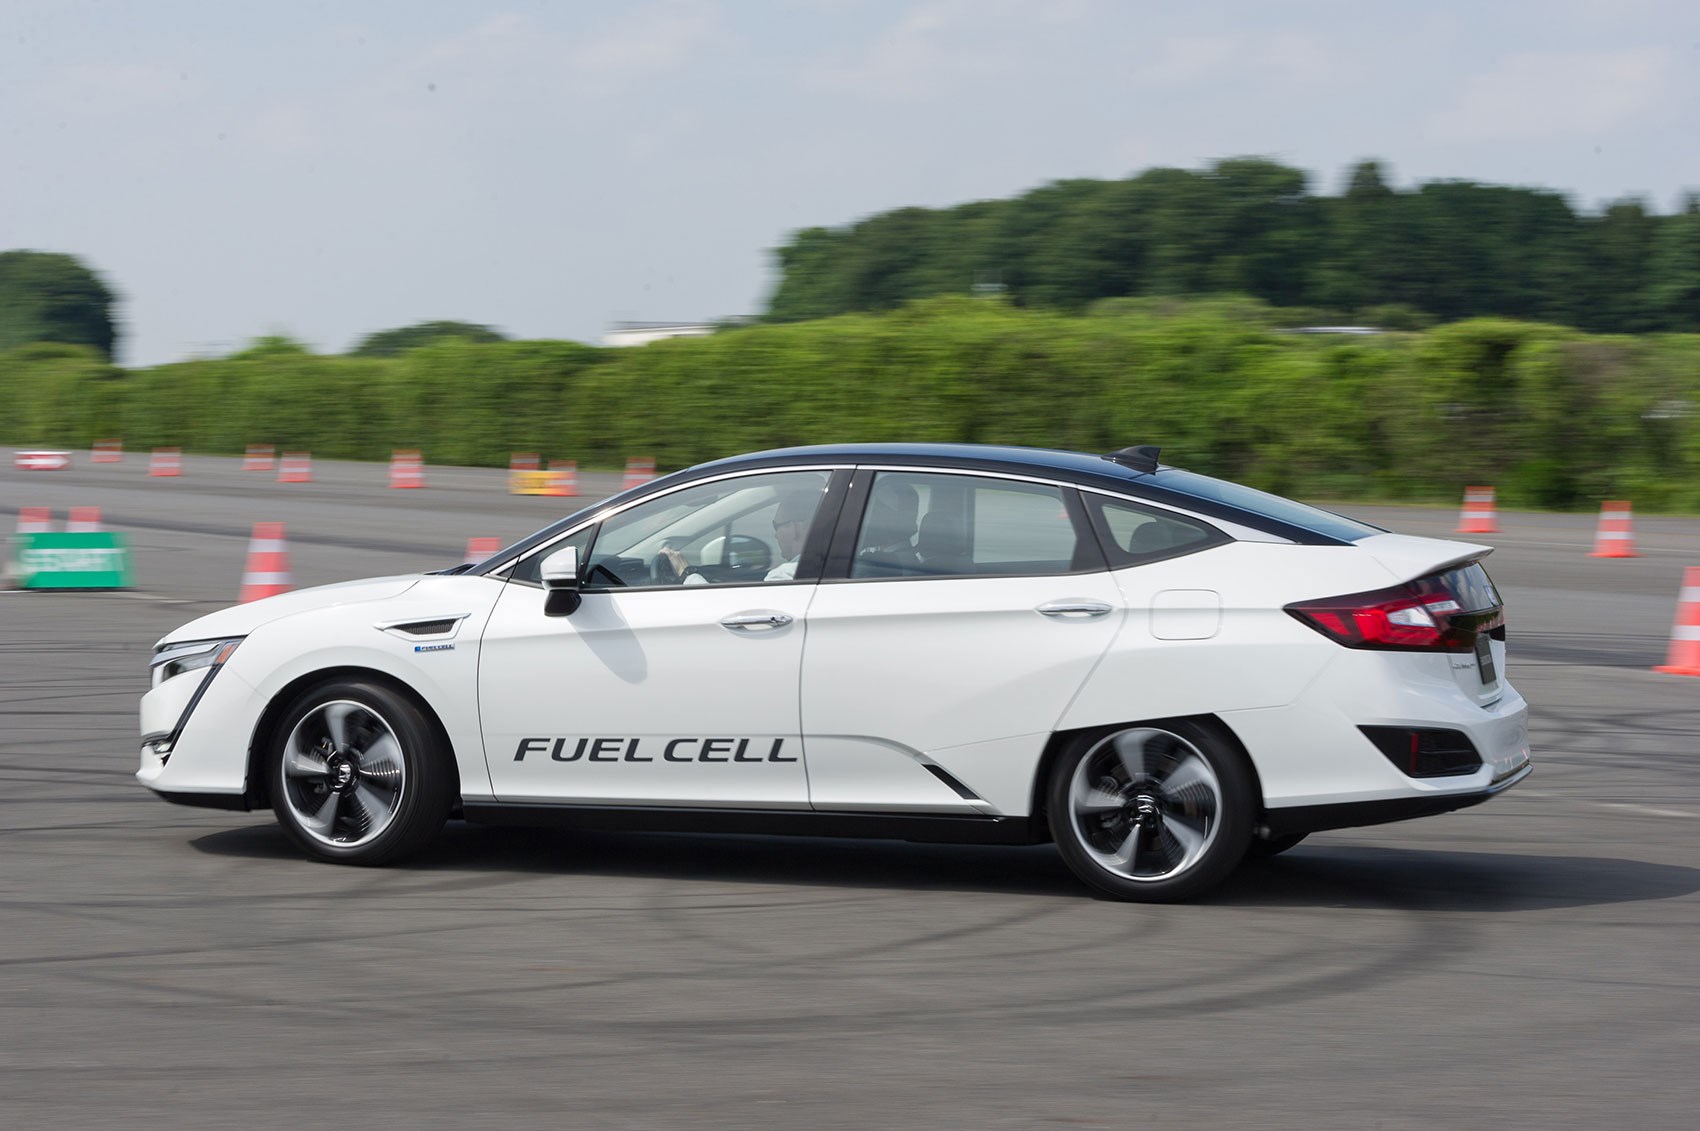 Honda Clarity fuel-cell uses hydrogen power